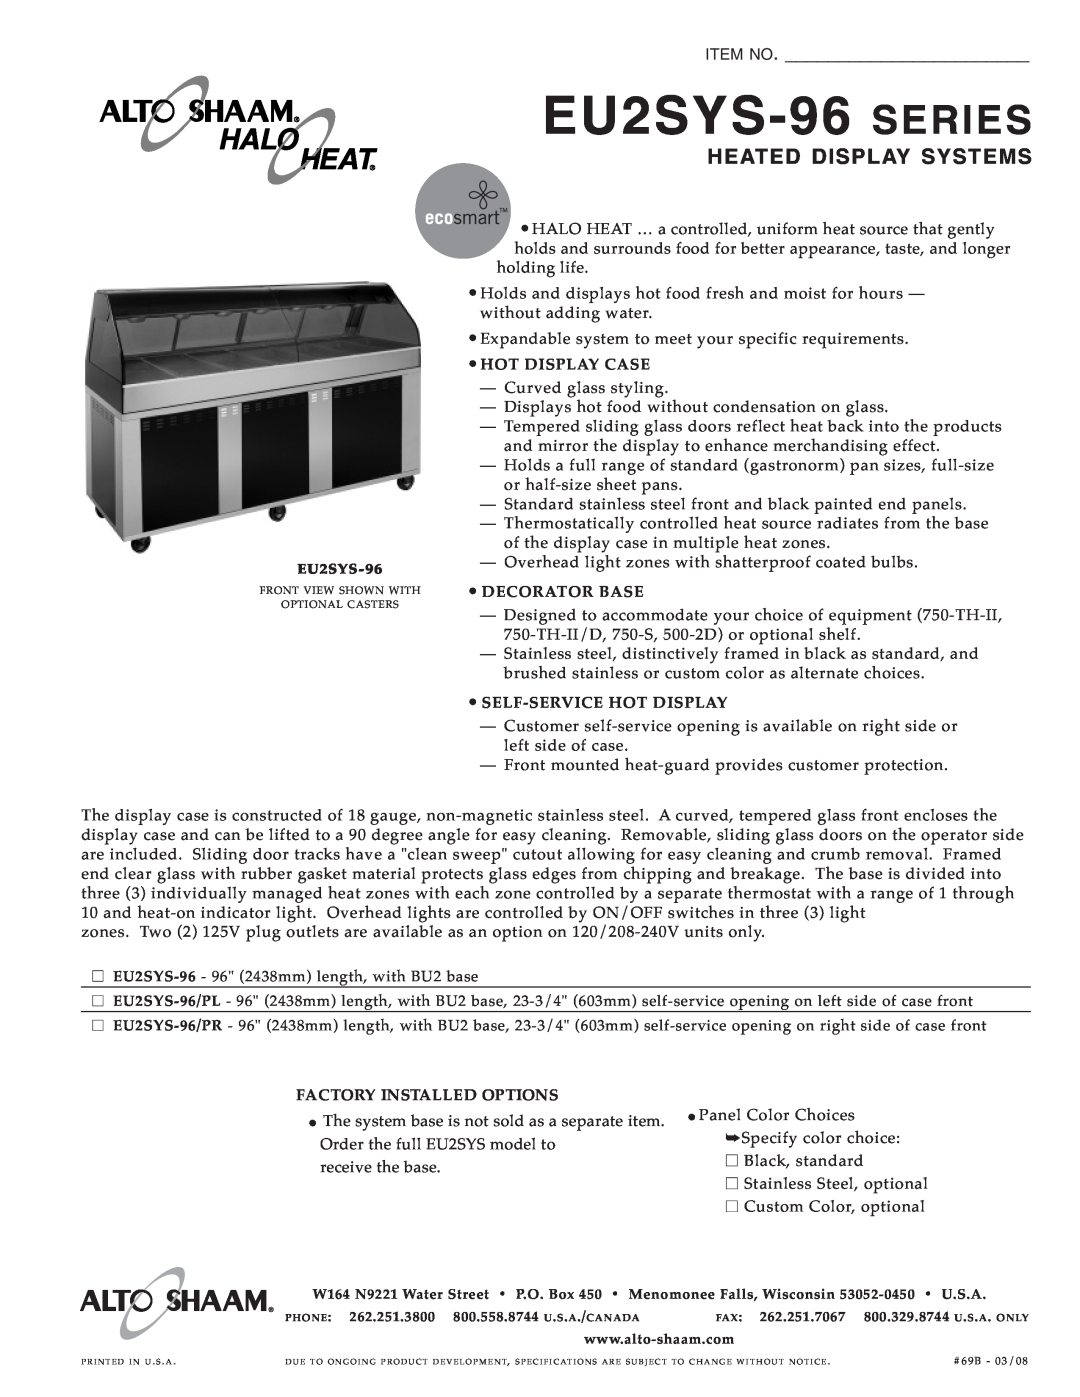 Alto-Shaam EU2SYS-96 specifications EU2SYS -96 SERIES, Item No, Heated Display Systems 